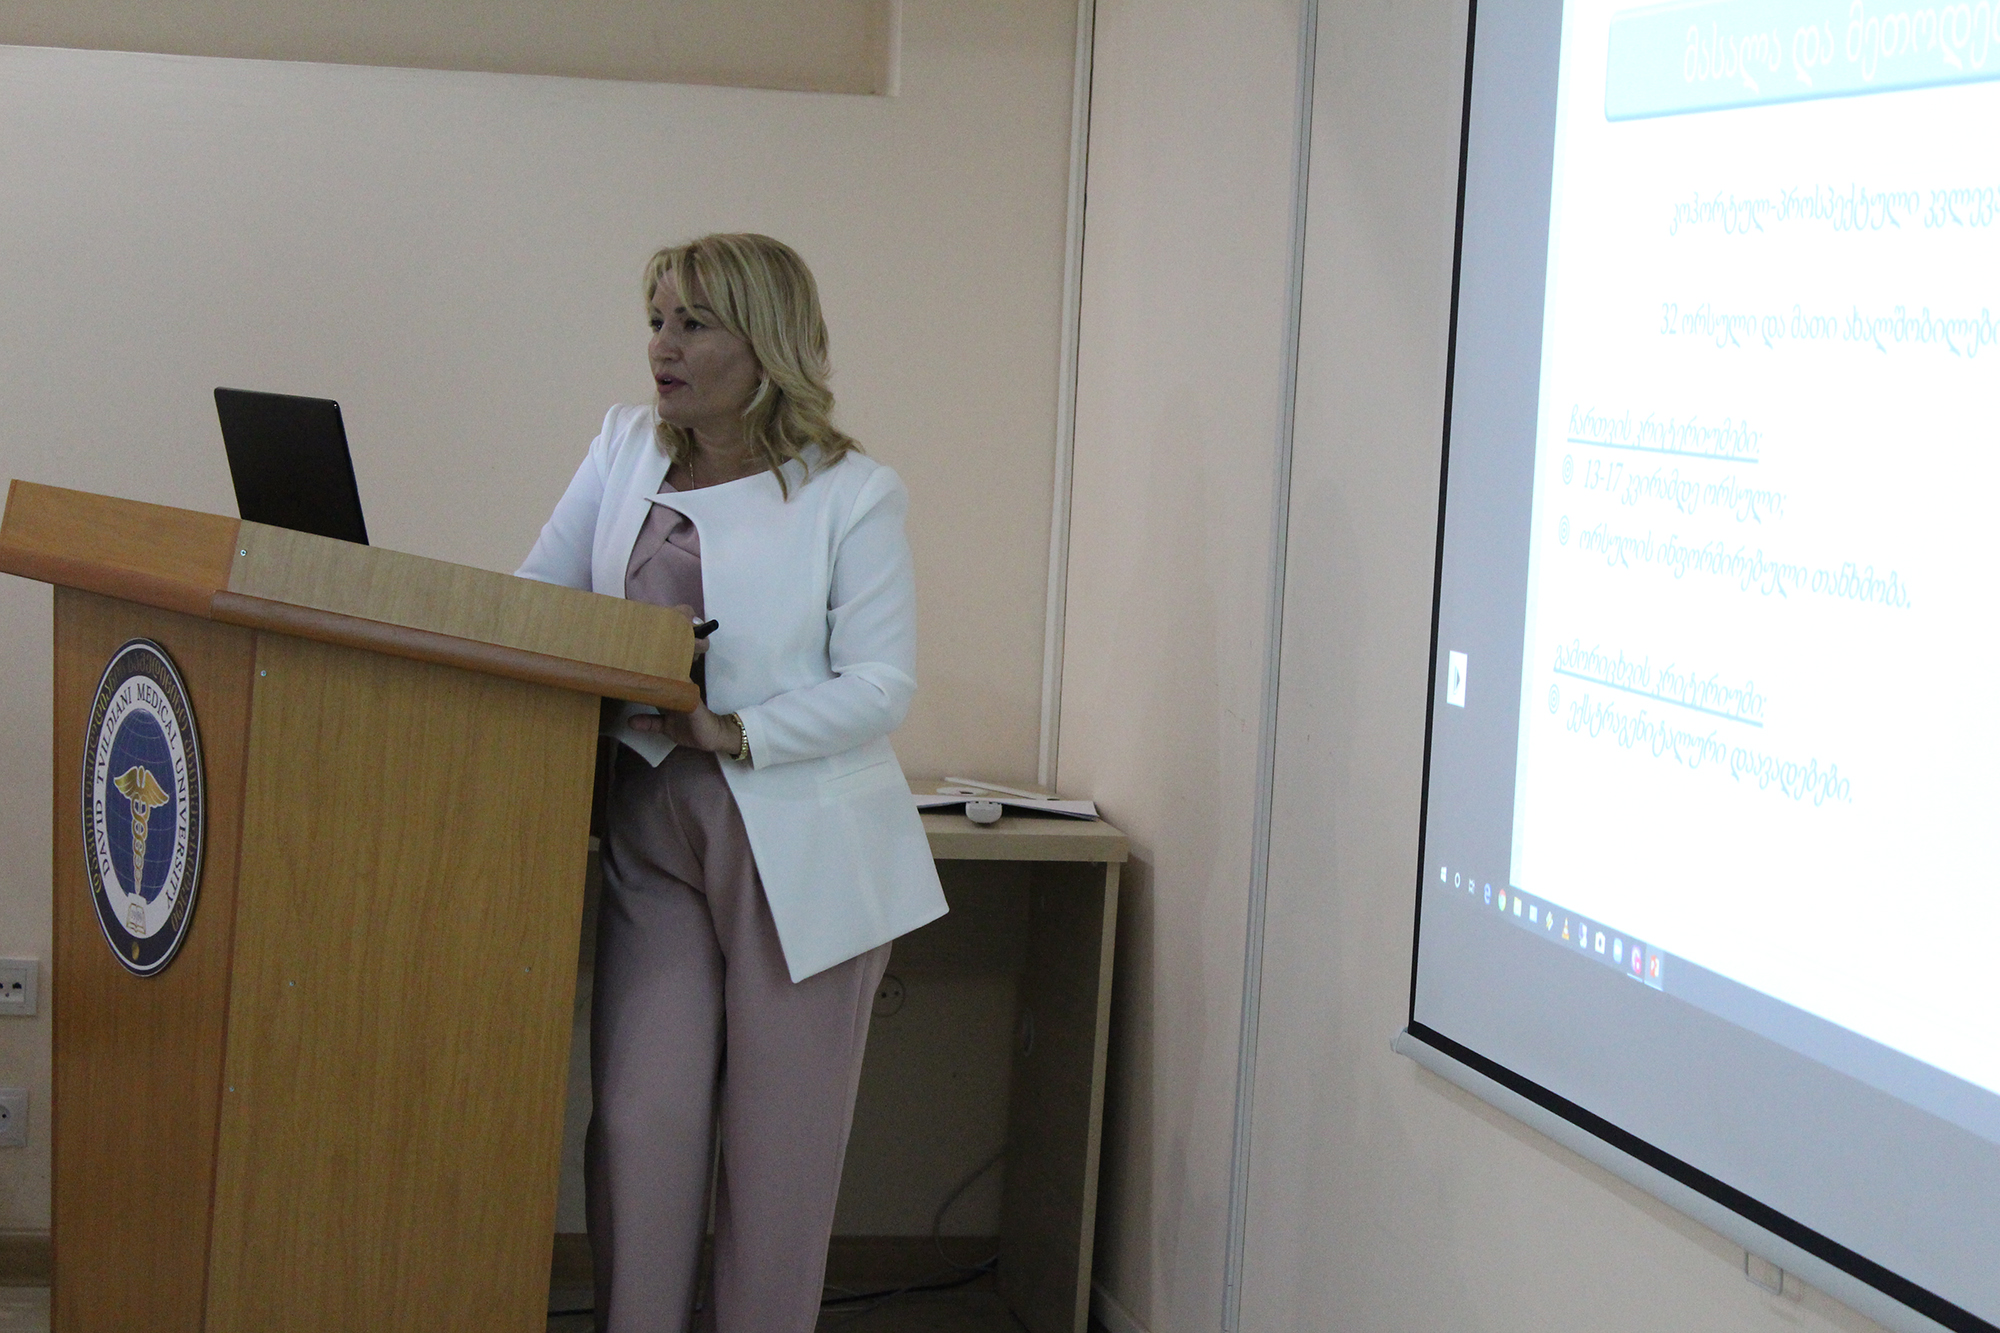 The dissertation defense of PhD candidate Tamar Bakhtadze with title ,,The Impact of Fetal Programming on the Development of Childhood Respiratory Diseases and Asthma ”